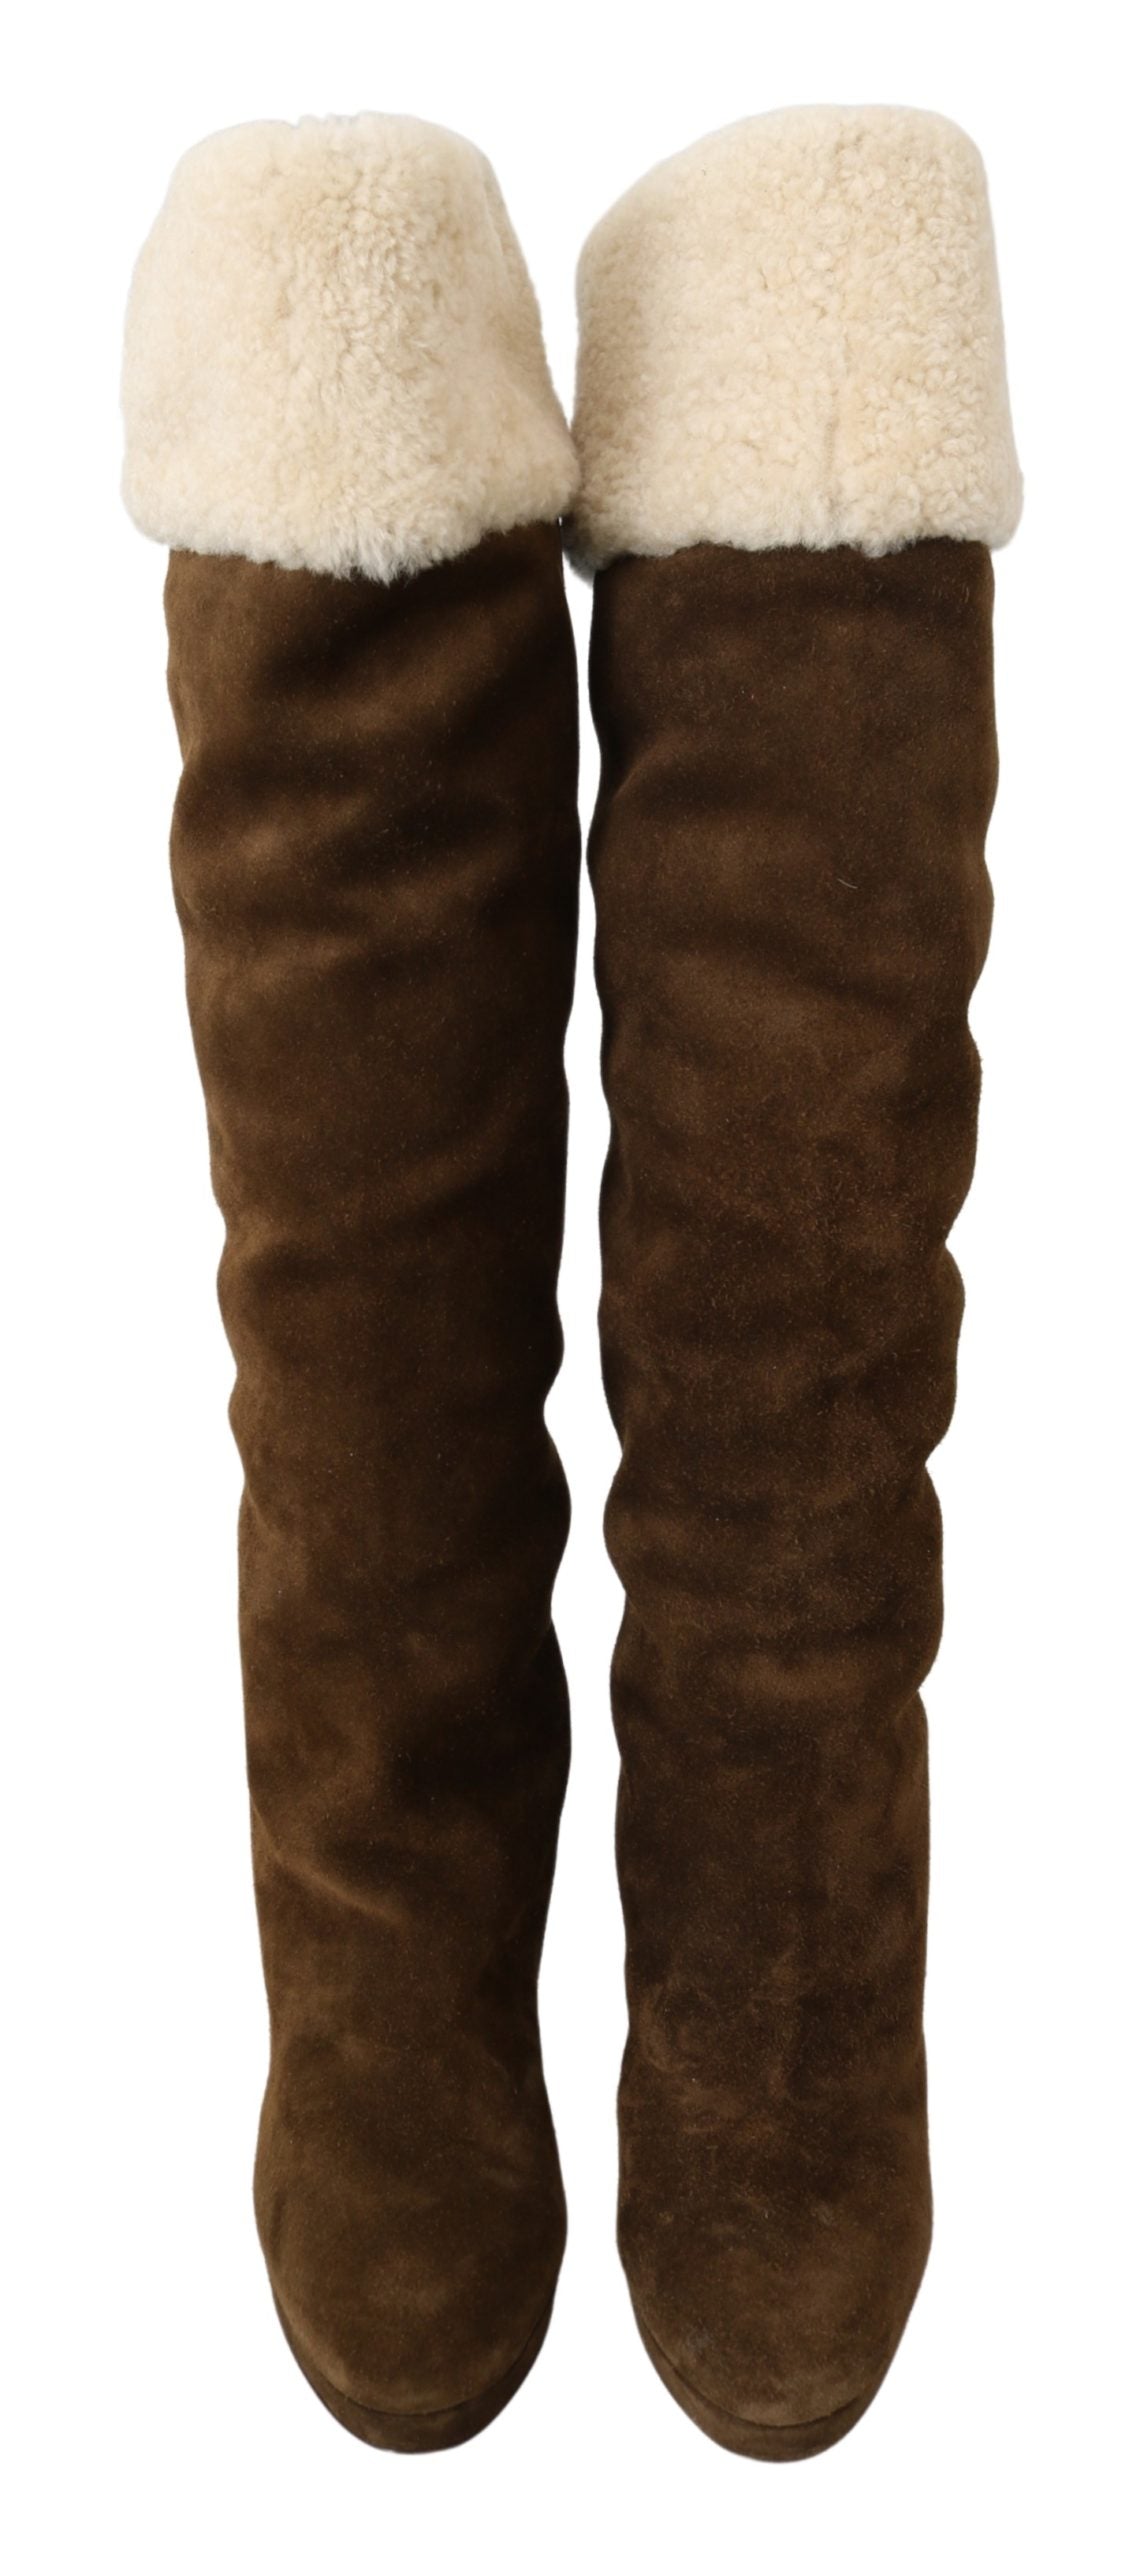 Brown Suede Shearling Knee High Boots Shoes